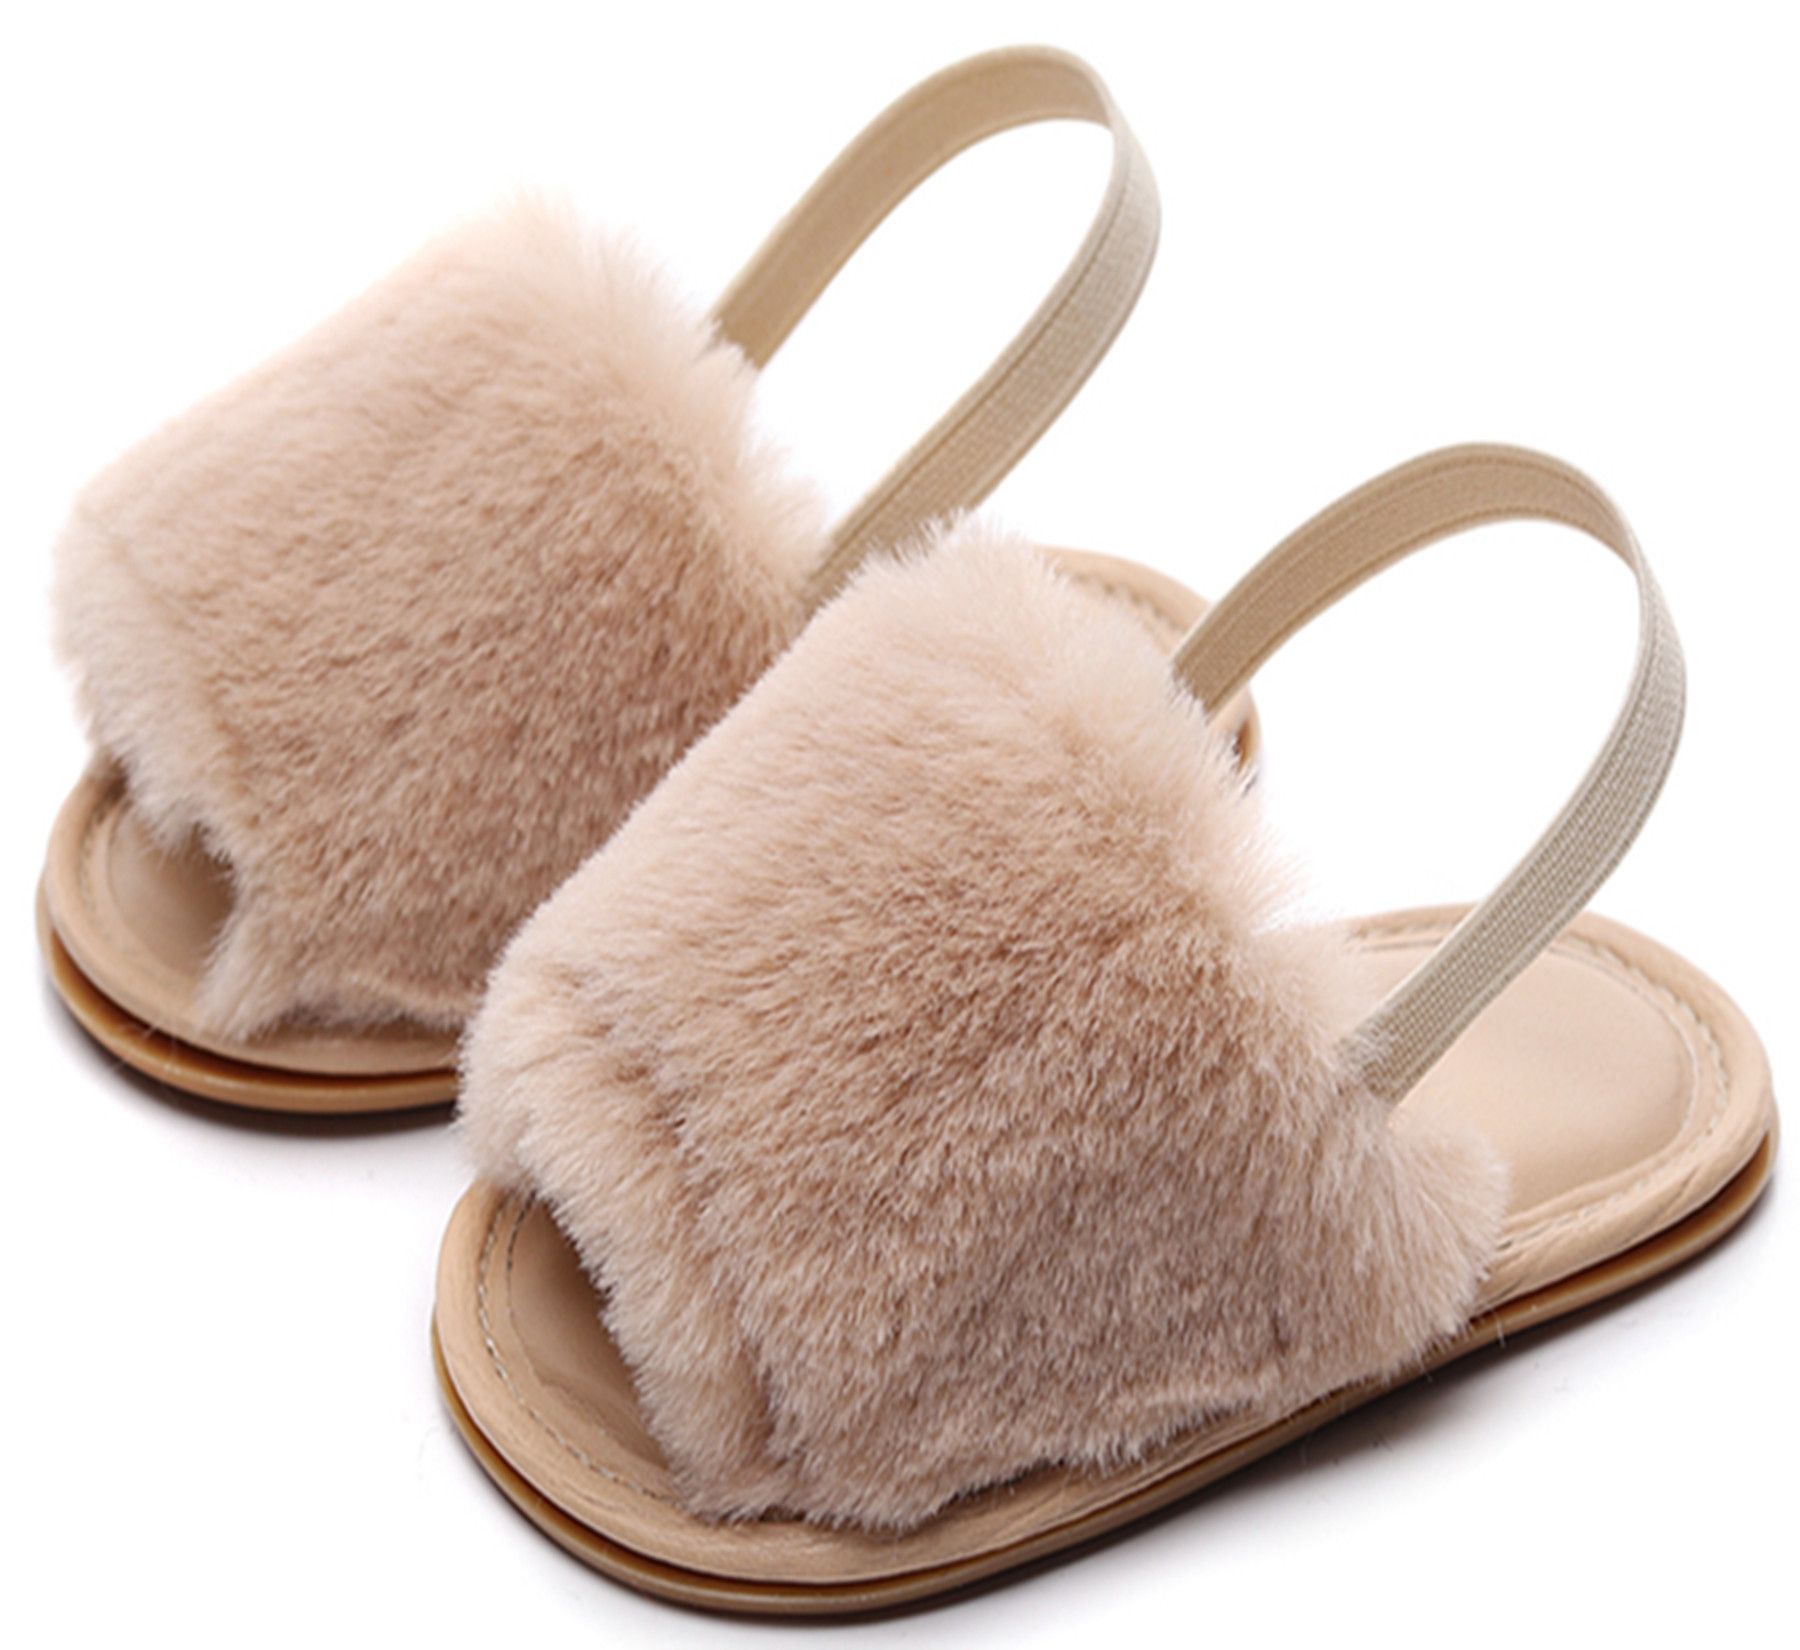 HONGTEYA Baby Girls Sandals Soft Soled Faux Fur Infant Toddler Summer Baby Moccasins Shoes Slippers